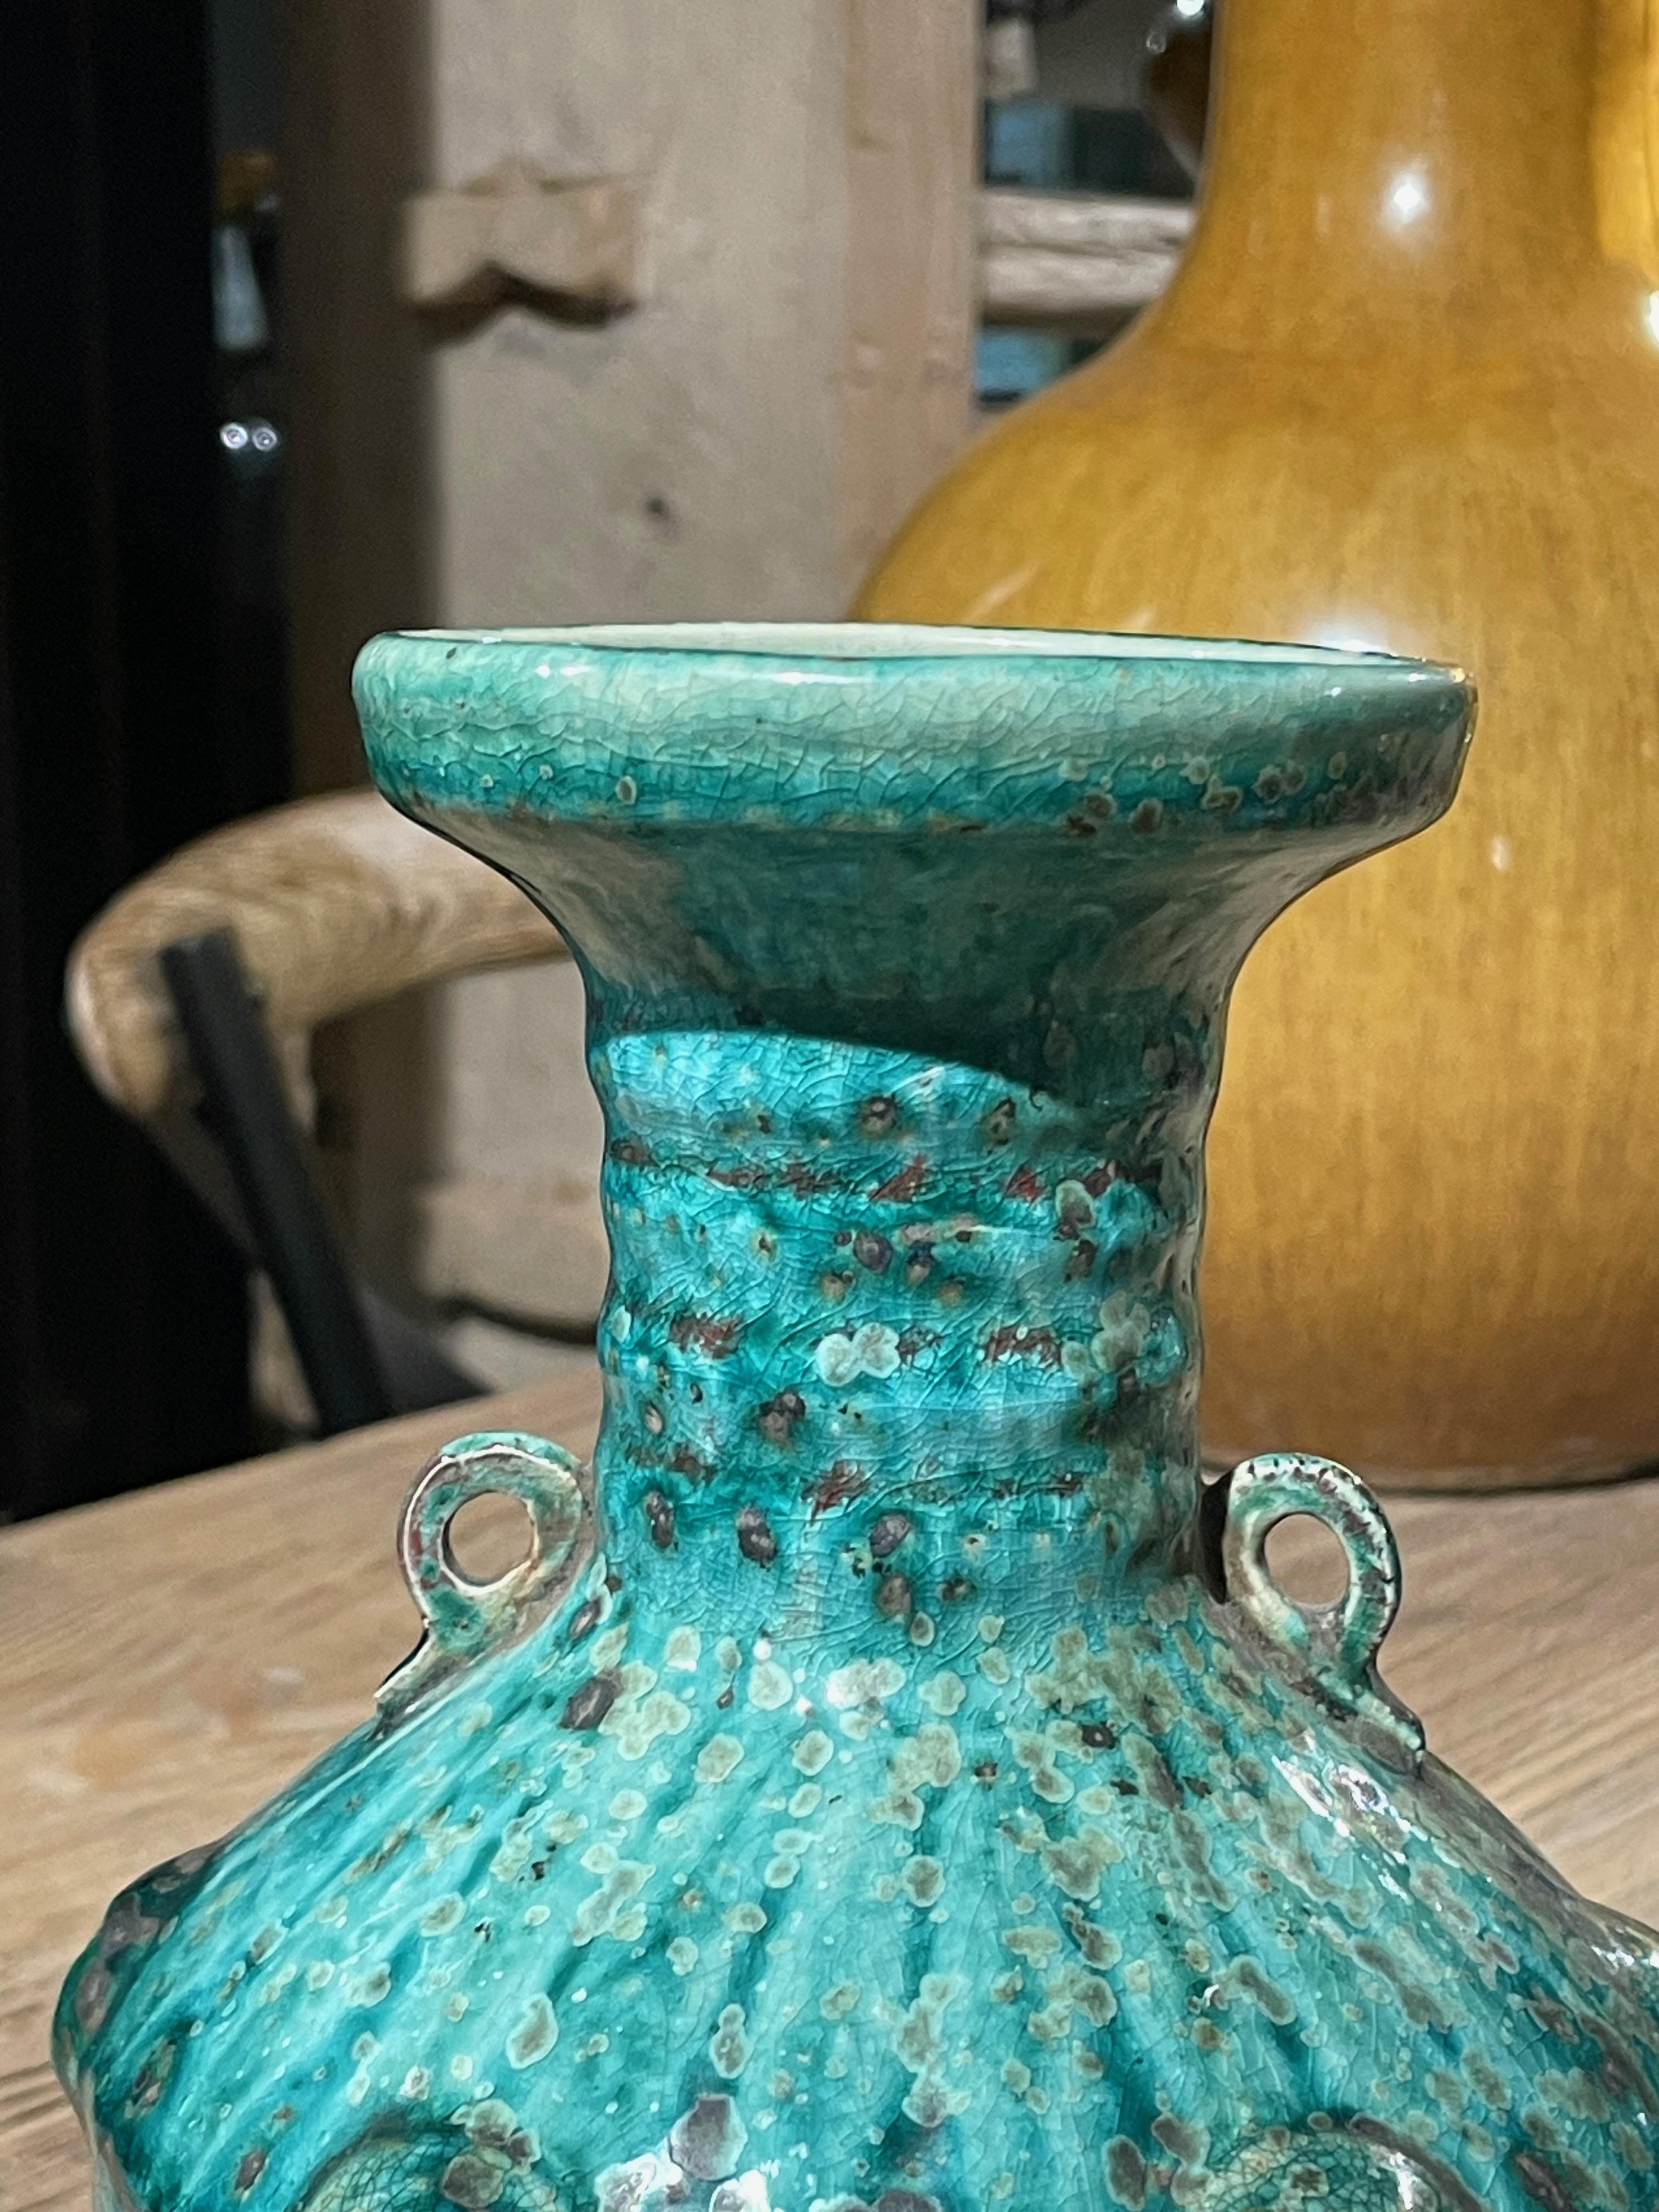 Contemporary Chinese mottled turquoise coloring with crackle glaze vase.
Horizontal rib texture design at neck of vase.
Two small handles.
Raised vertical pattern defining sections of the vase.
Dimpled textured overall design.
Two available and sold